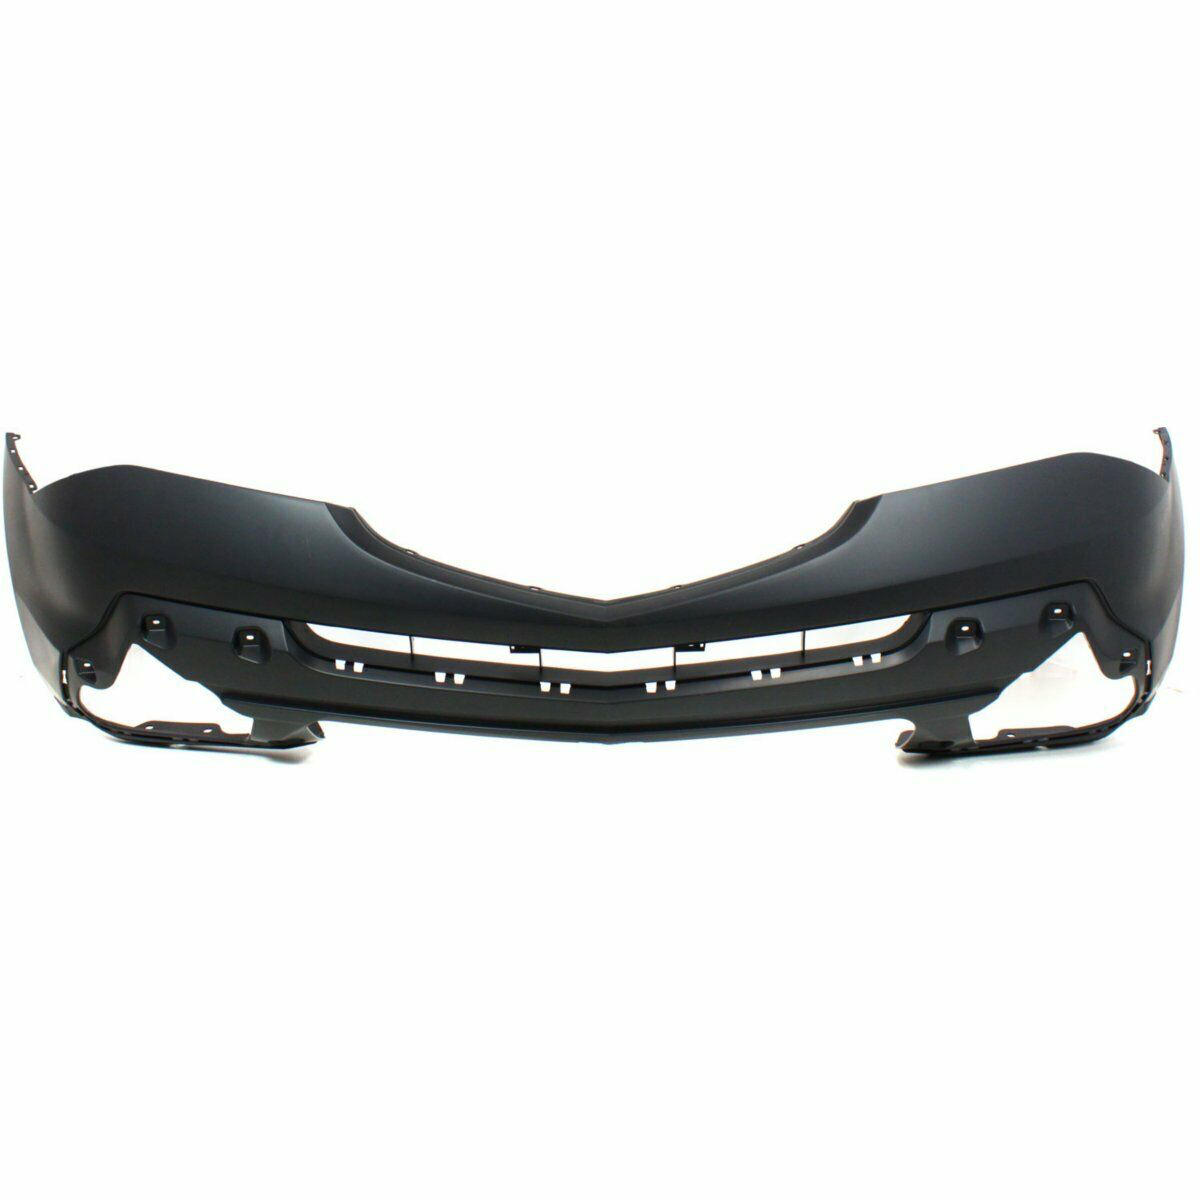 2007-2009 Acura MDX Front Bumper Painted to Match